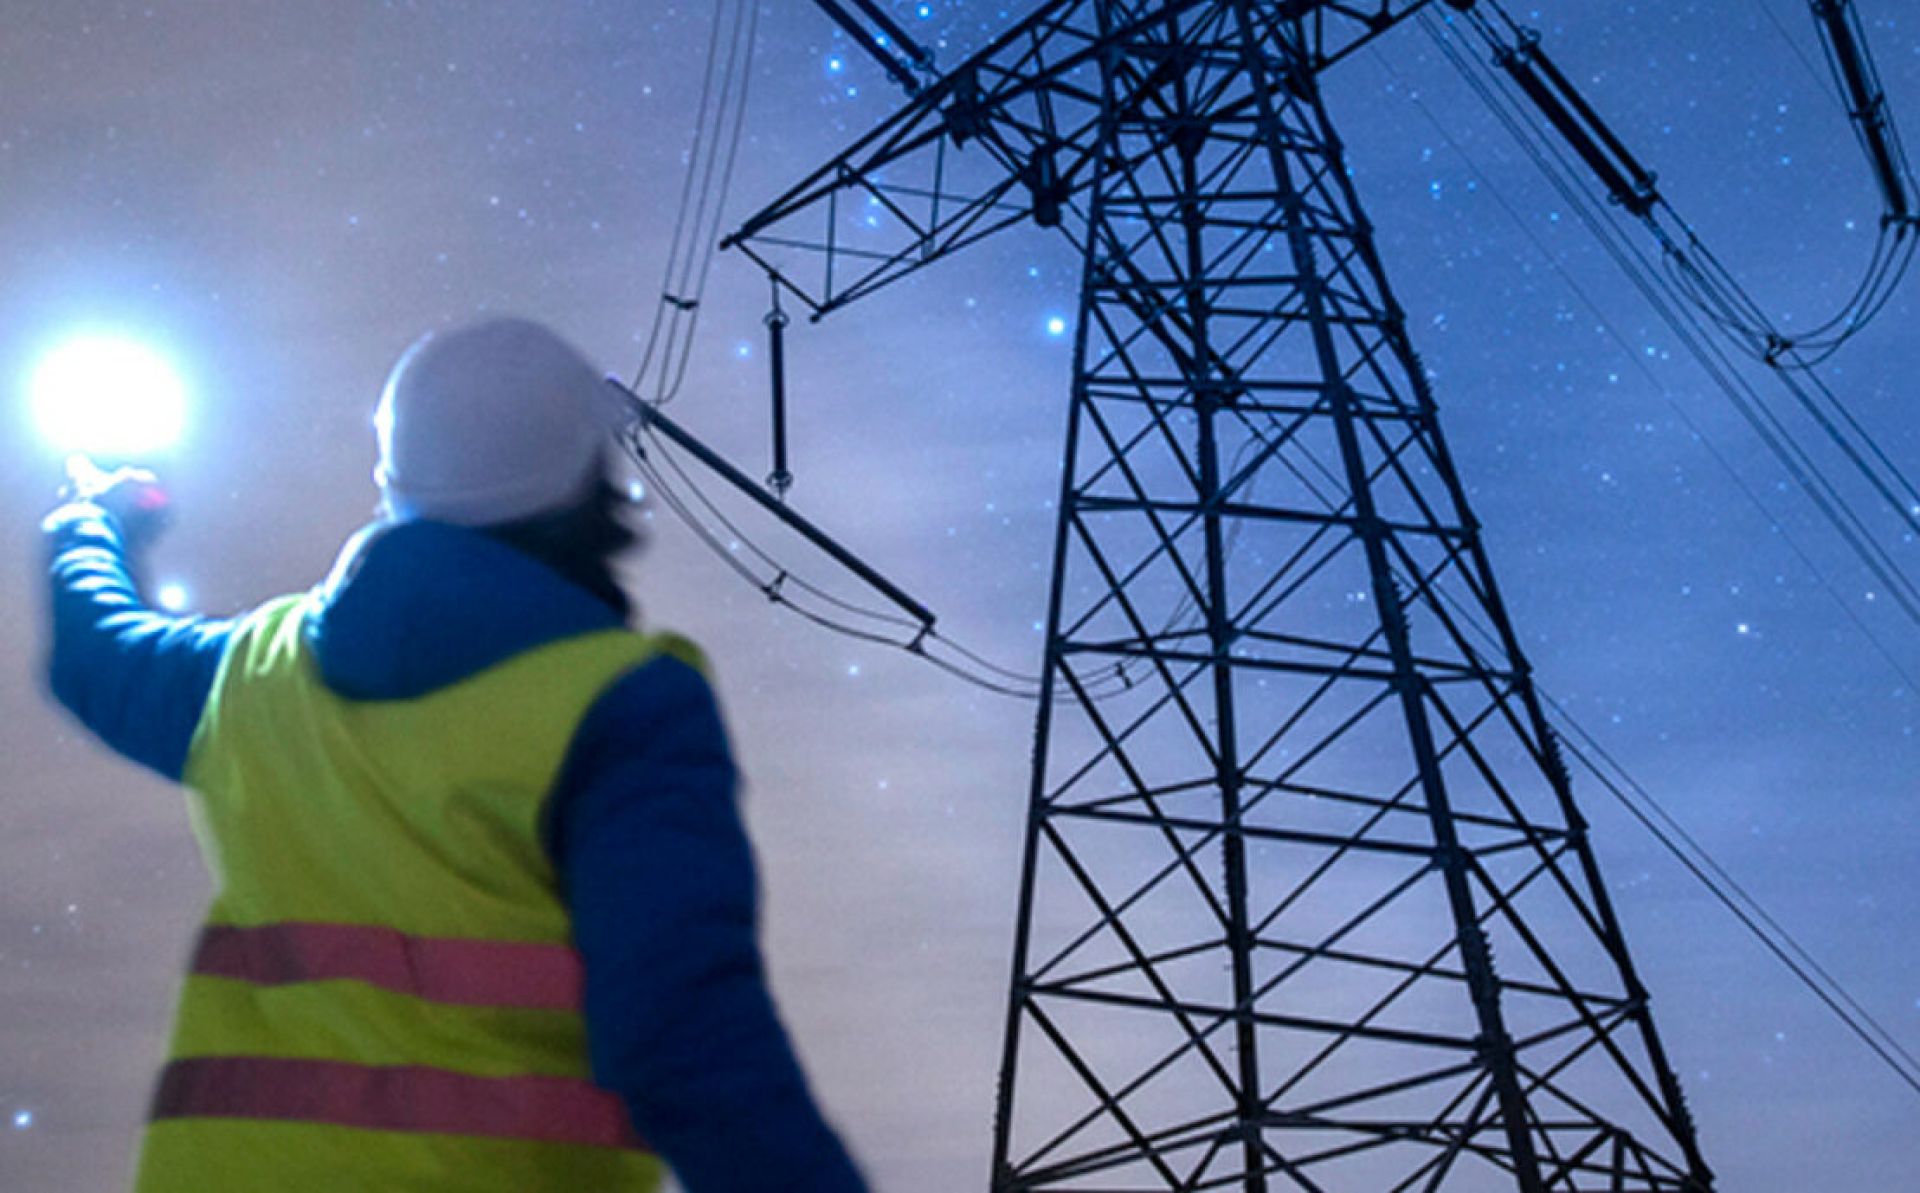 €372 million for Ukraine’s electricity company from EBRD and Netherlands